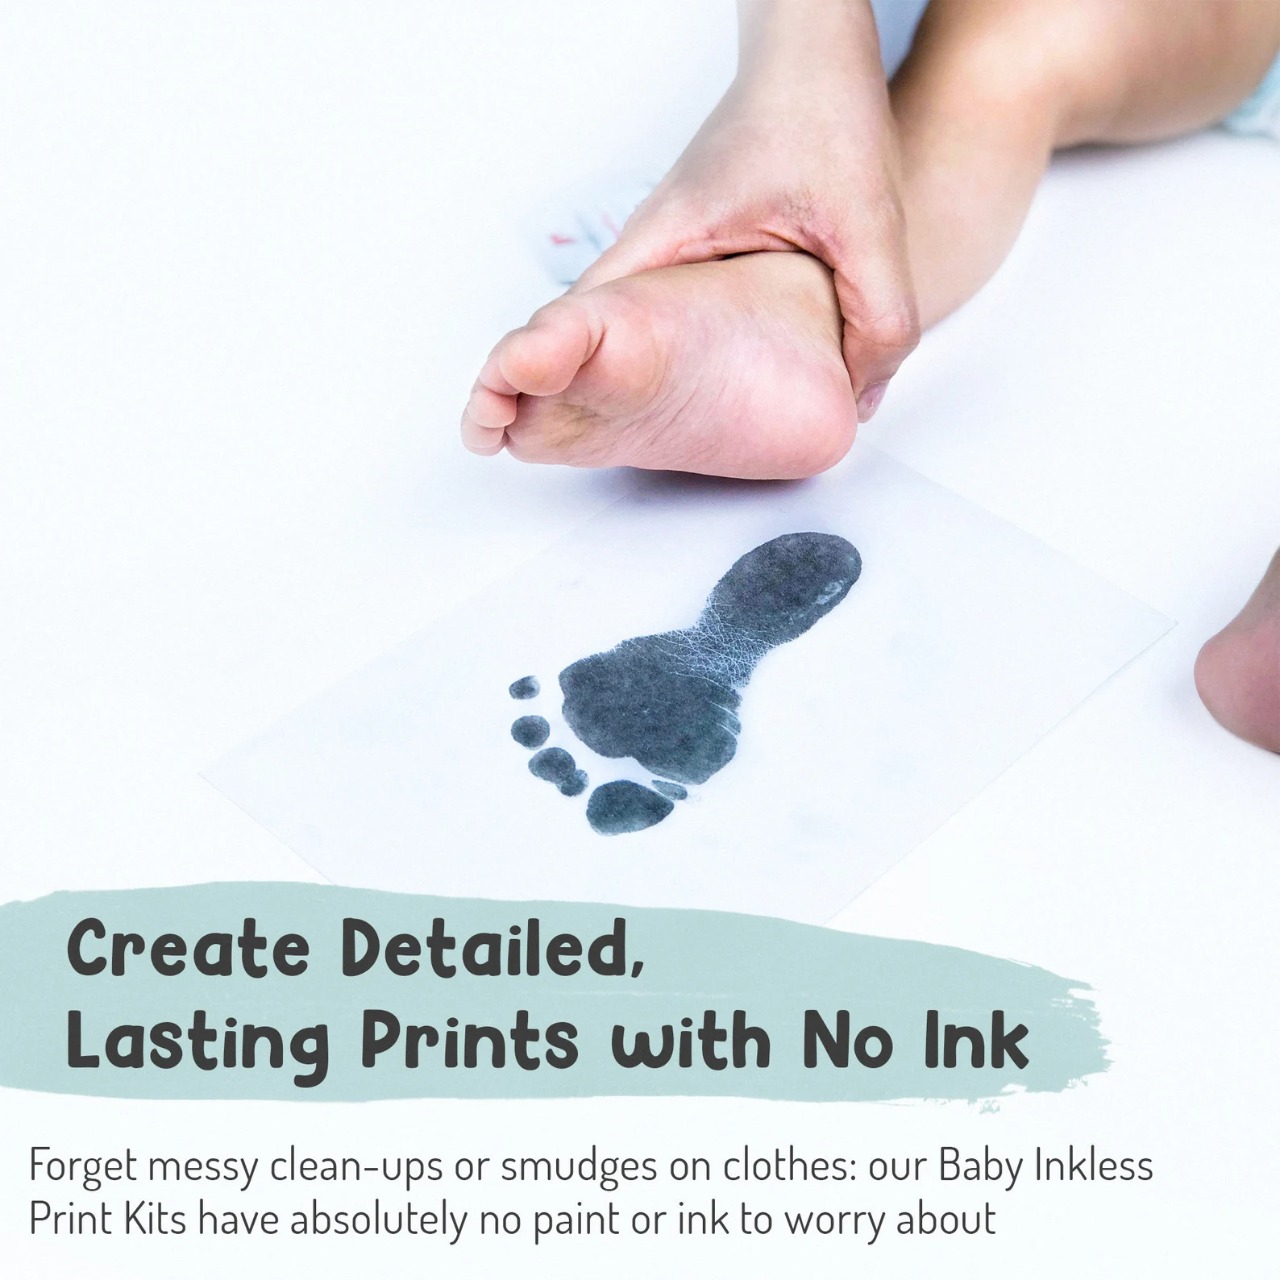 Baby Hand and Footprint Kit by Forever Fun Times | Get Hundreds of Detailed Prints with One Baby Safe Ink Pad | Easy to Clean, and Works with Any